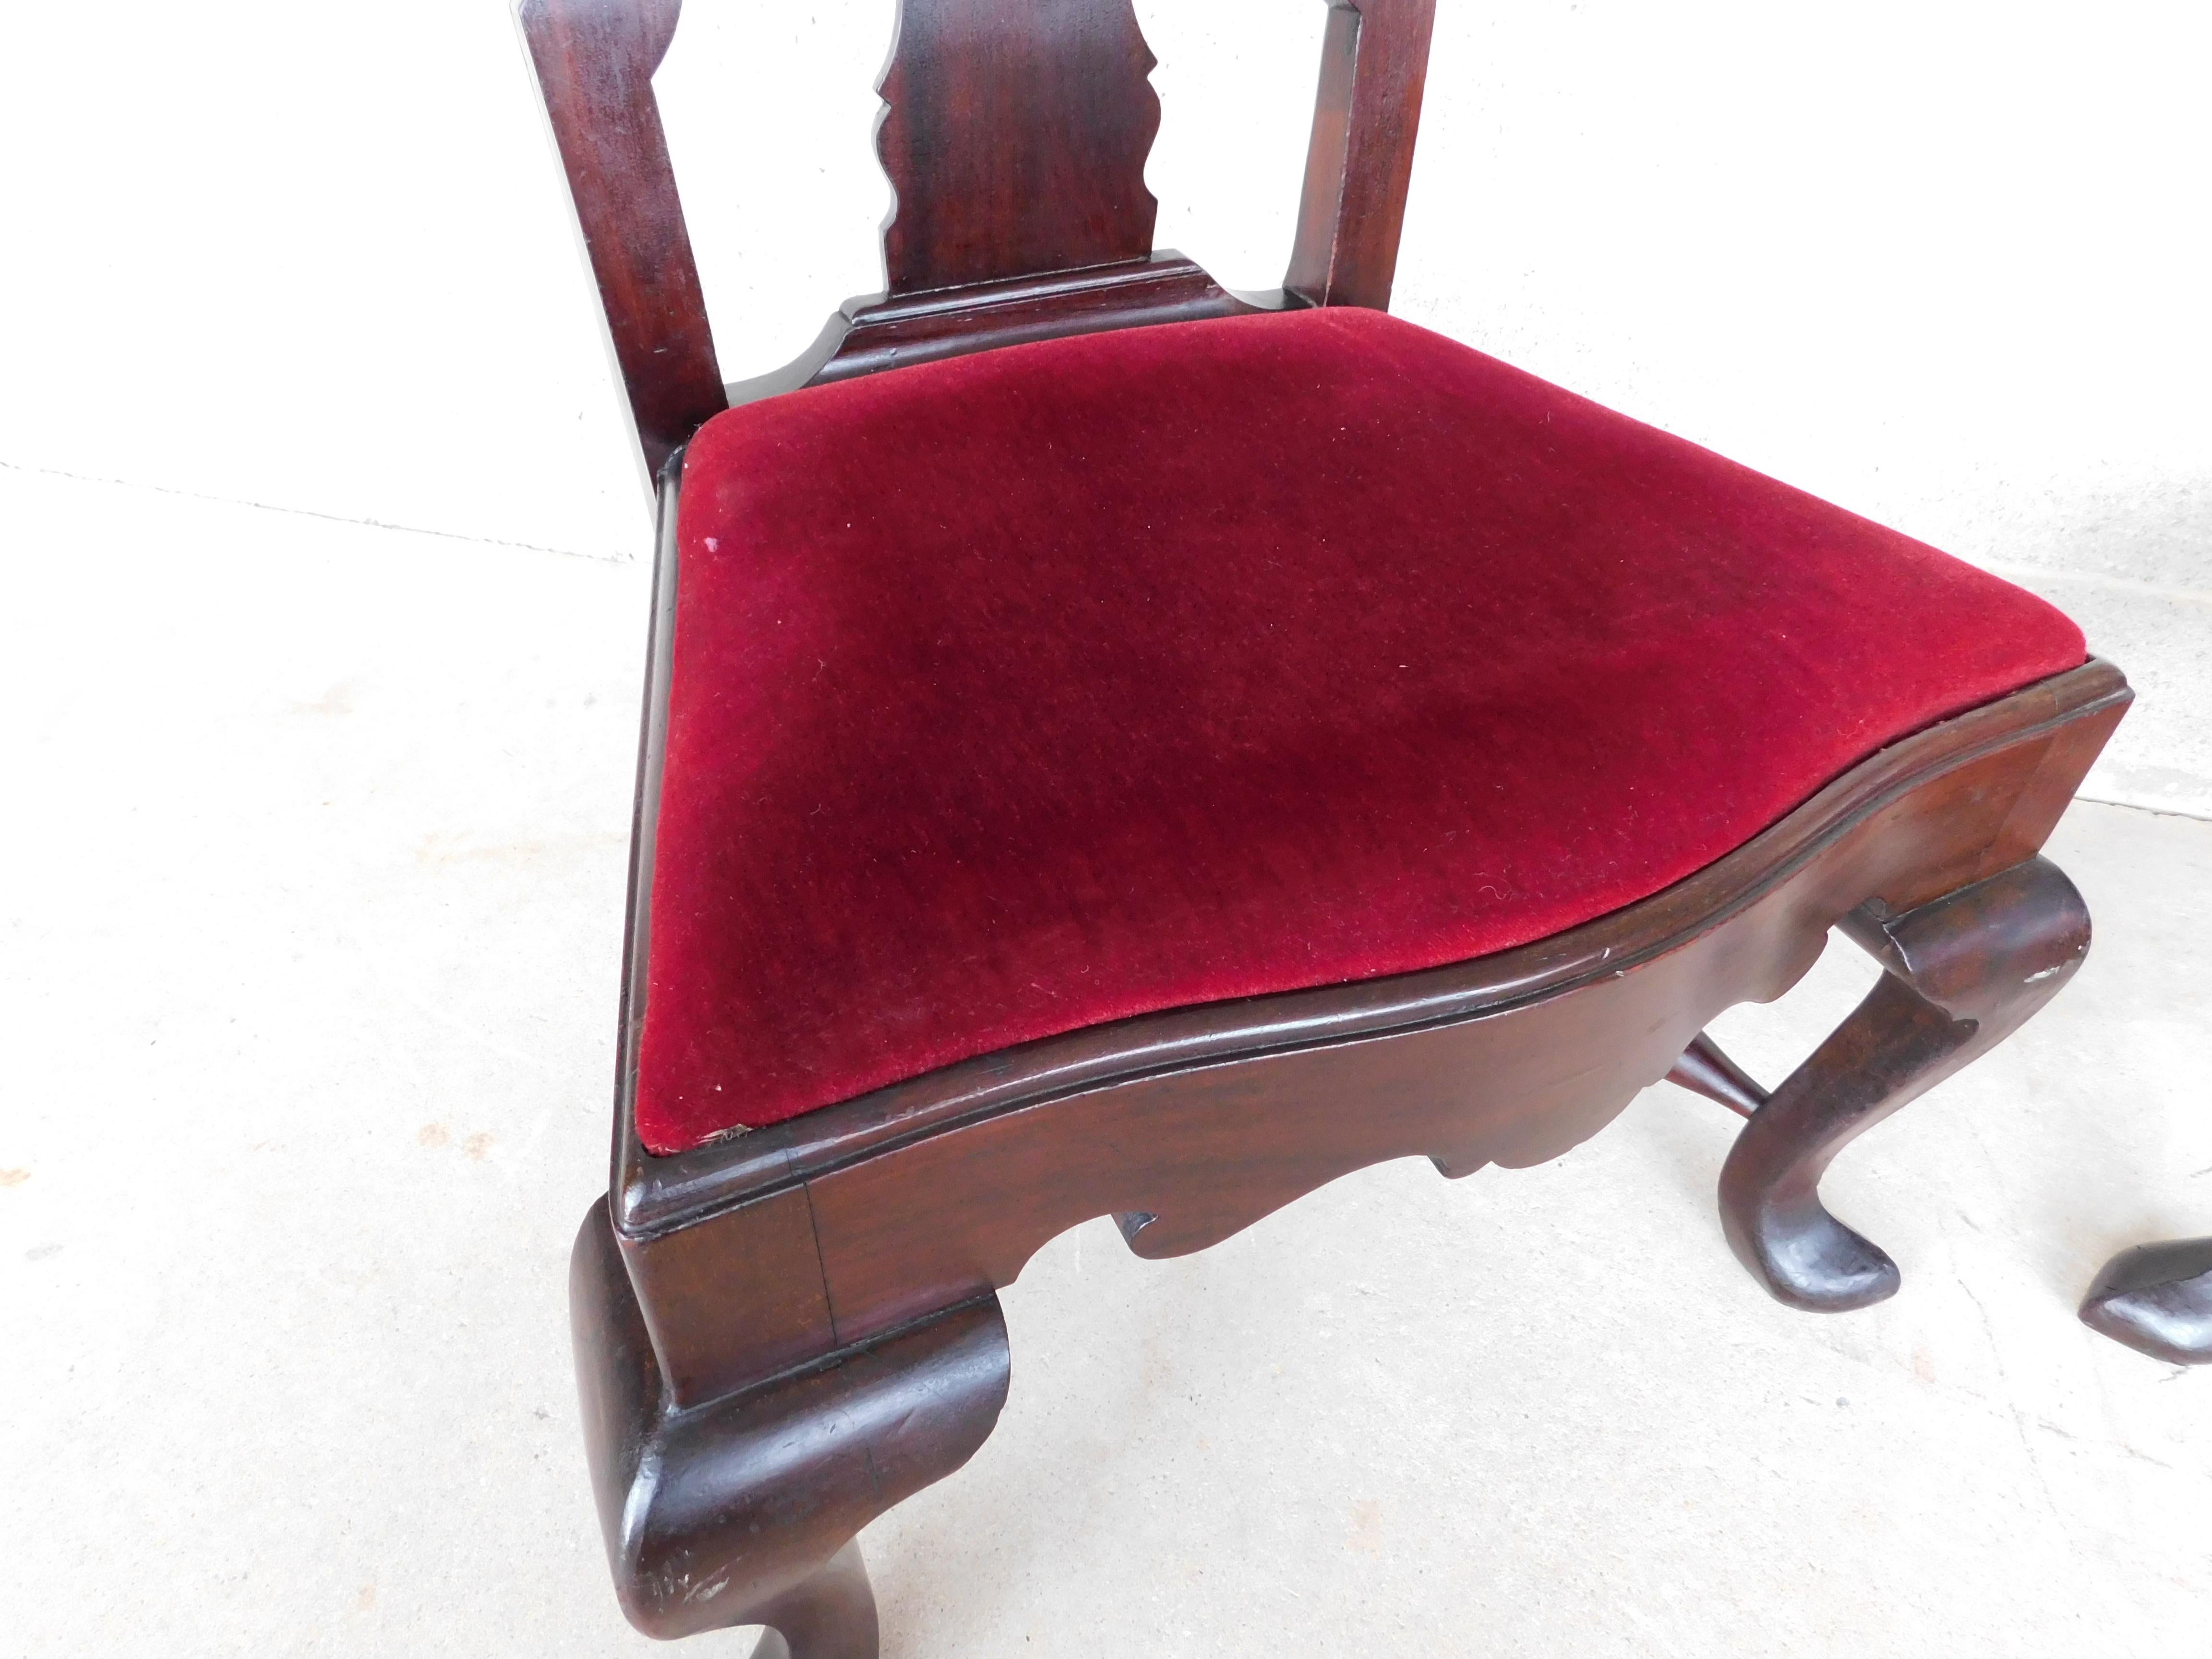 Feldenkreis Mahogany Queen Anne Style Oversize Accent Fireside Chairs - a Pair For Sale 2